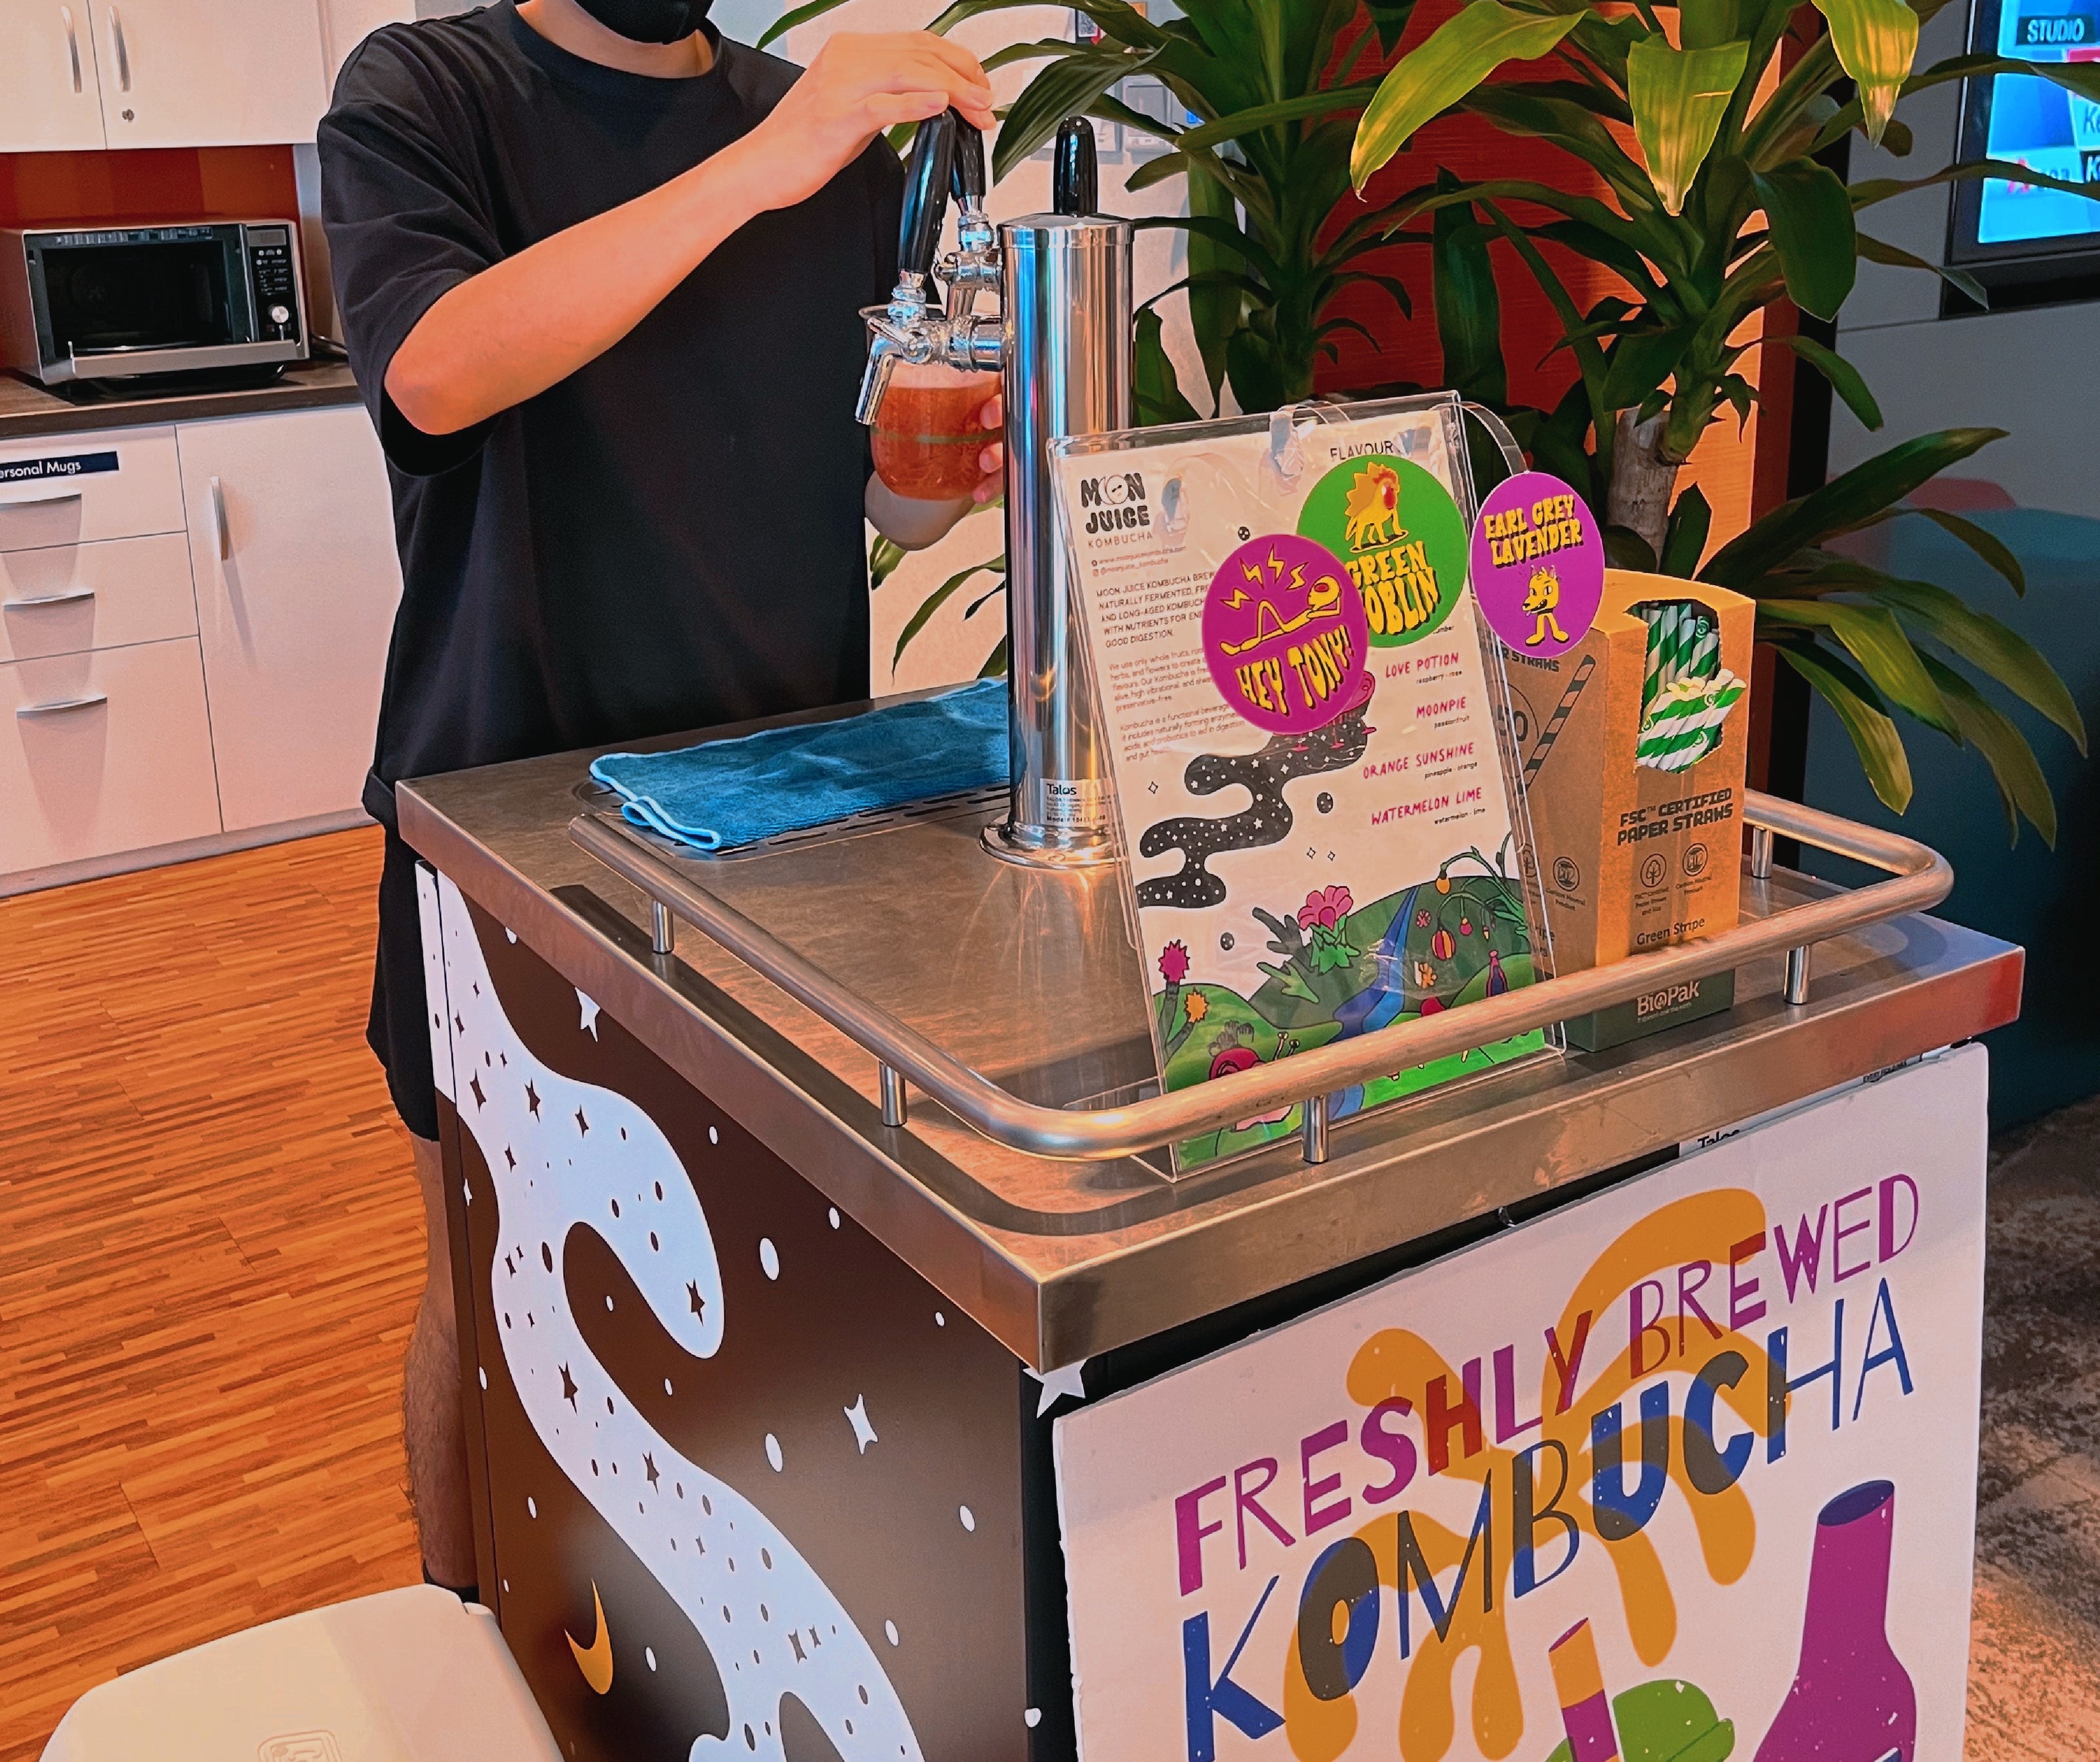 An image of Moon Juice Kombucha's pop up station at an office including a kegerator